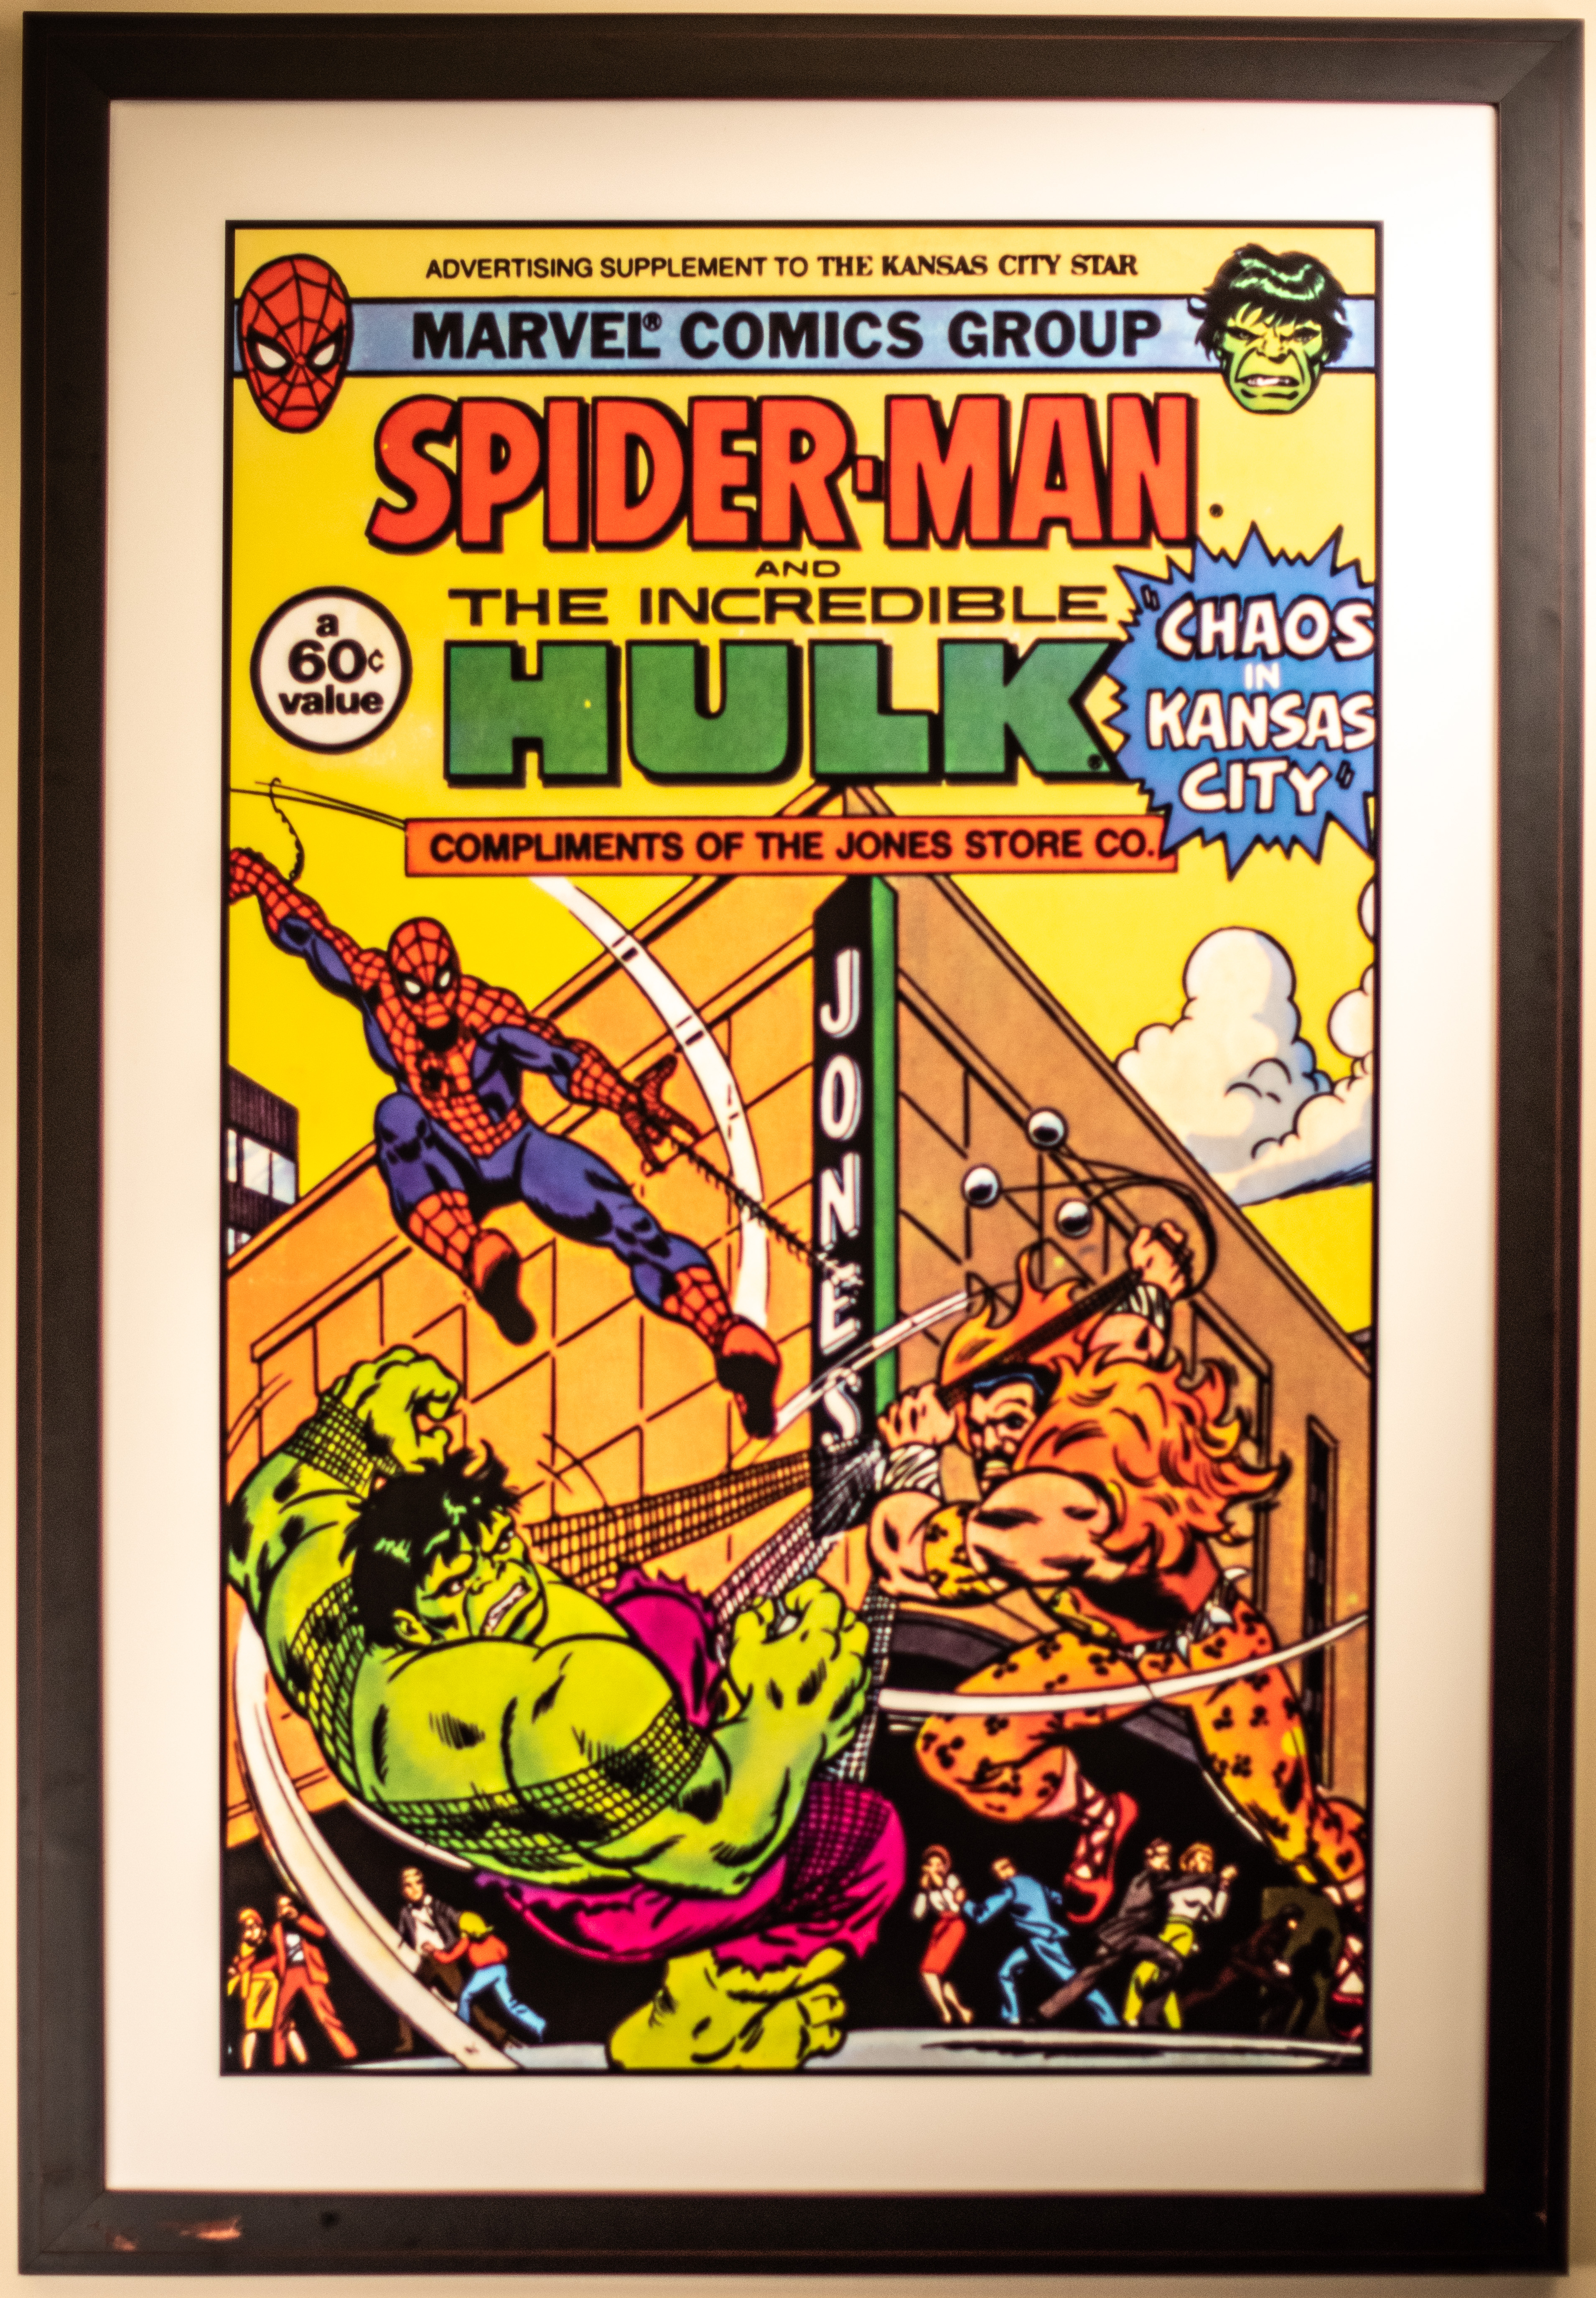 Enlarged poster print of the AD Supplement to the Kansas City Star from the Jones Store Co featuring iconic Marvel characters The Amazing Spider-Man, The Incredible Hulk and Kraven the Hunter.